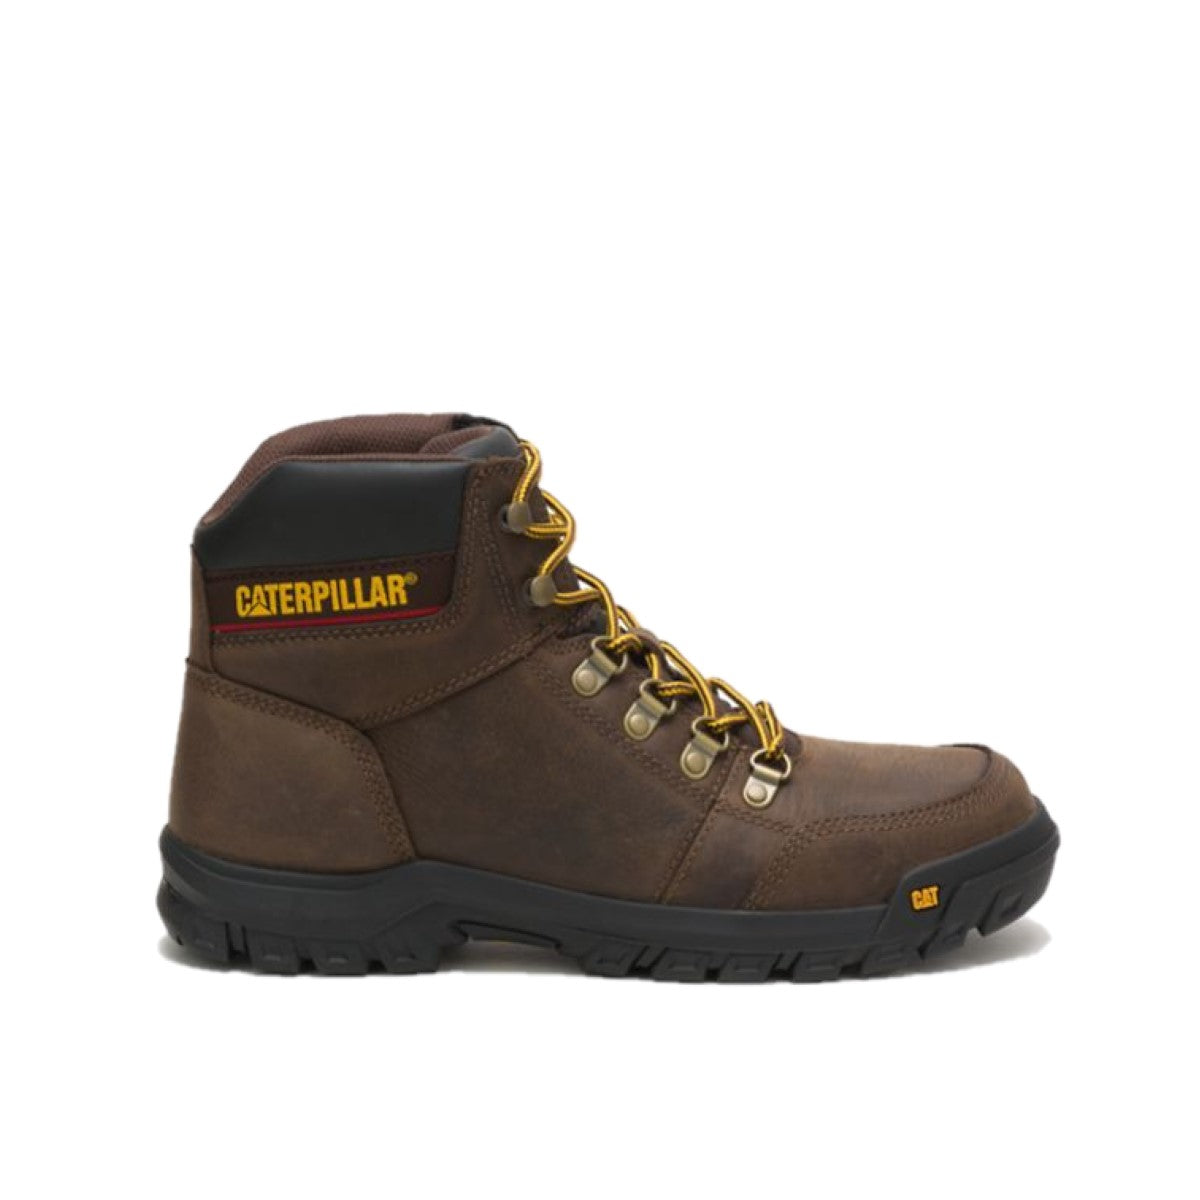 CATERPILLAR P74087-M OUTLINE MN'S (Medium) Brown Leather Work Boots